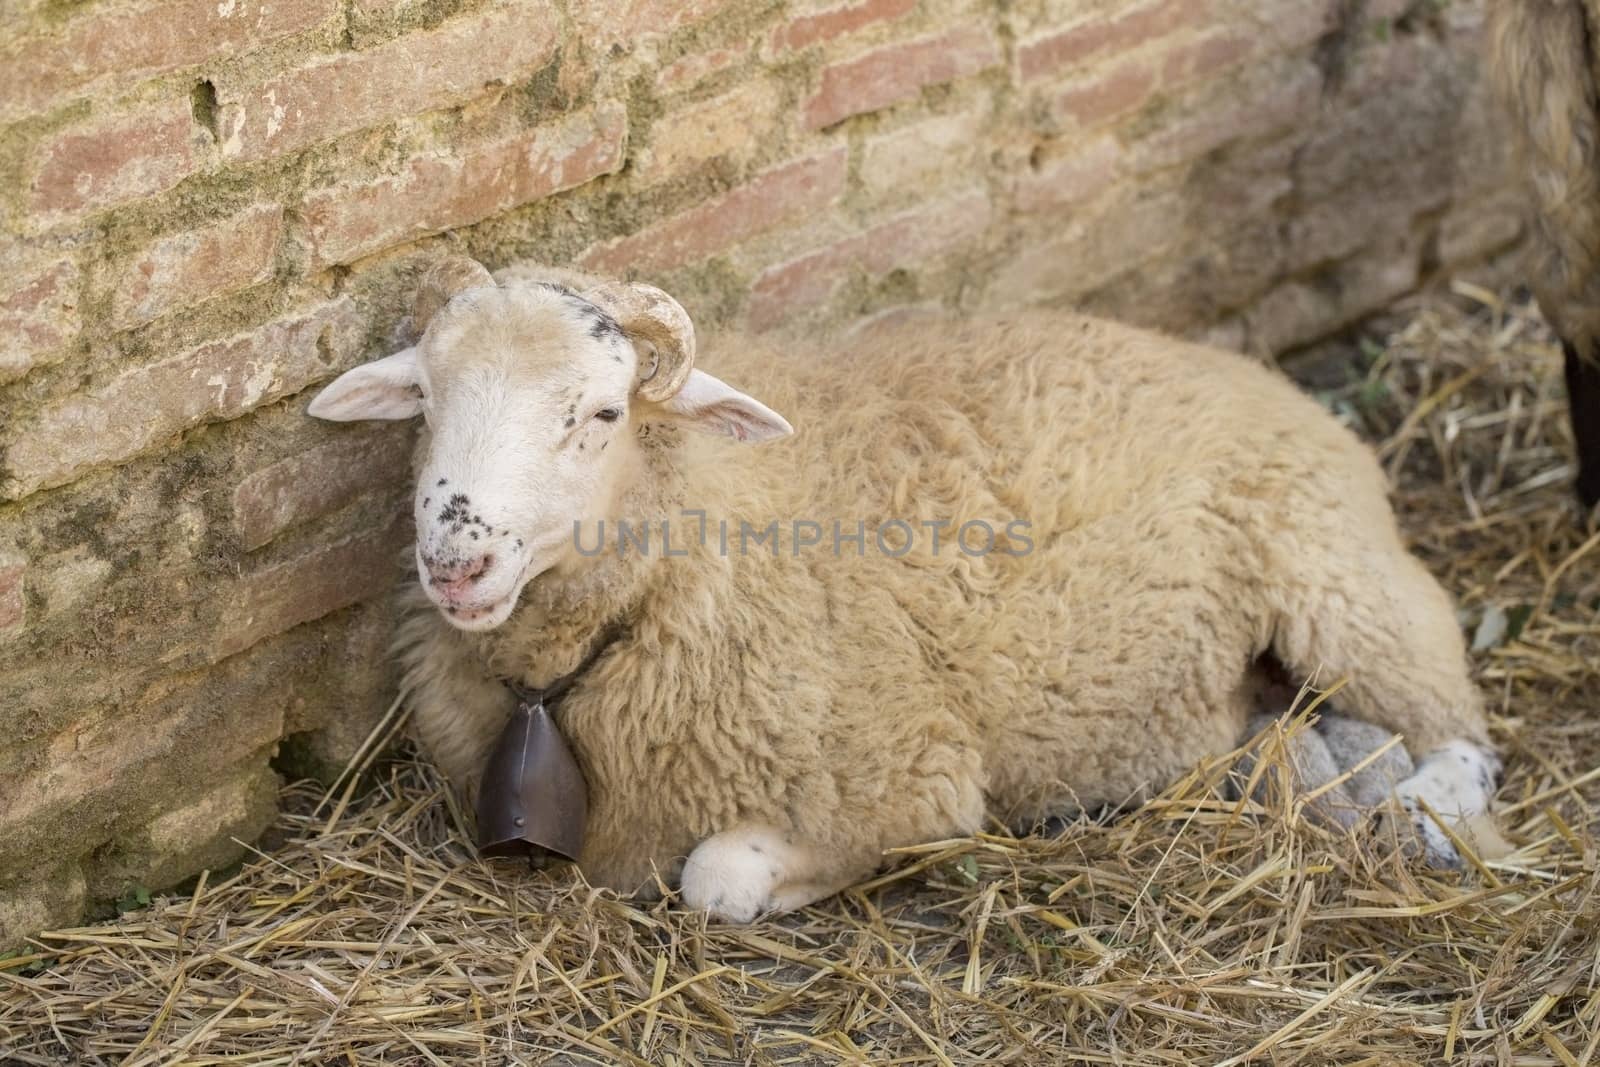 Picture of a cute sheep relaxing in daylight.